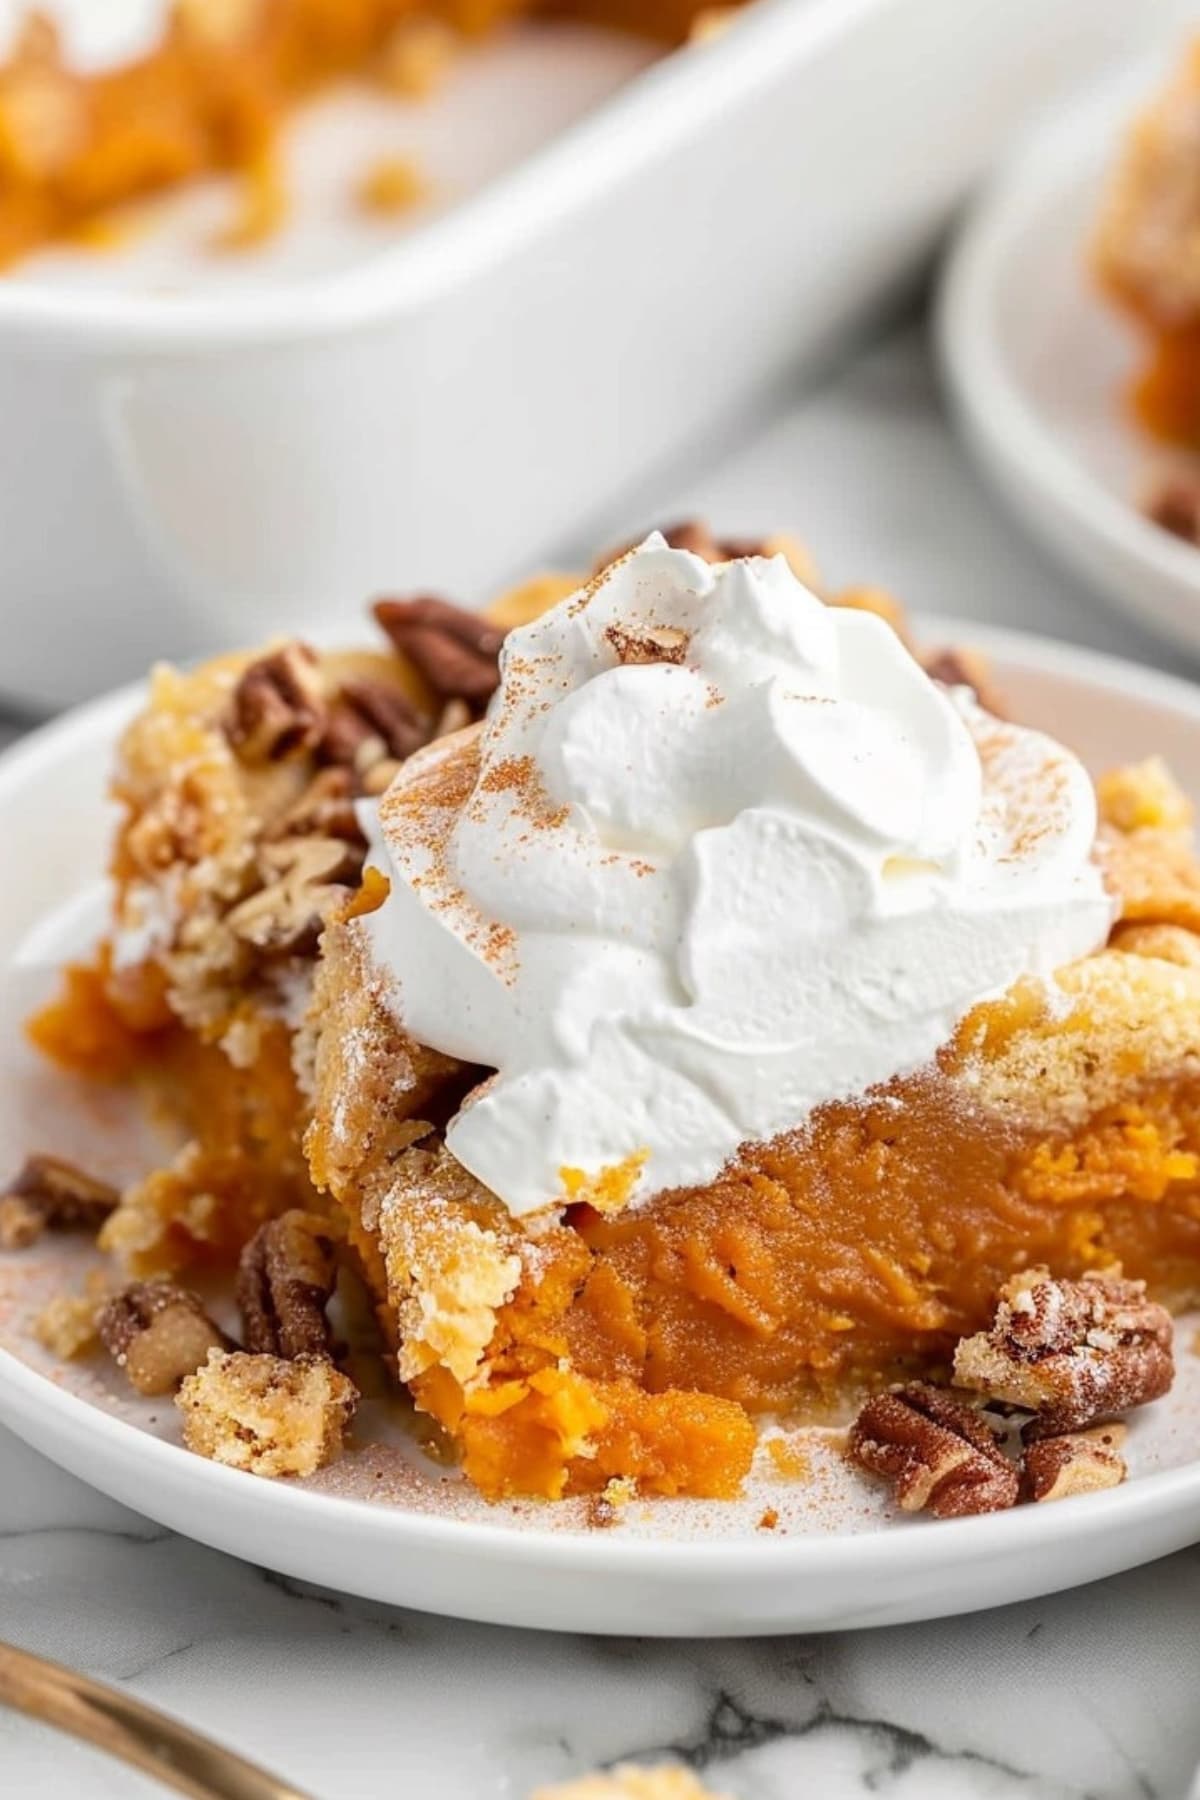 Slice of sweet potato dump cake with whipped cream on top served on a white plate.